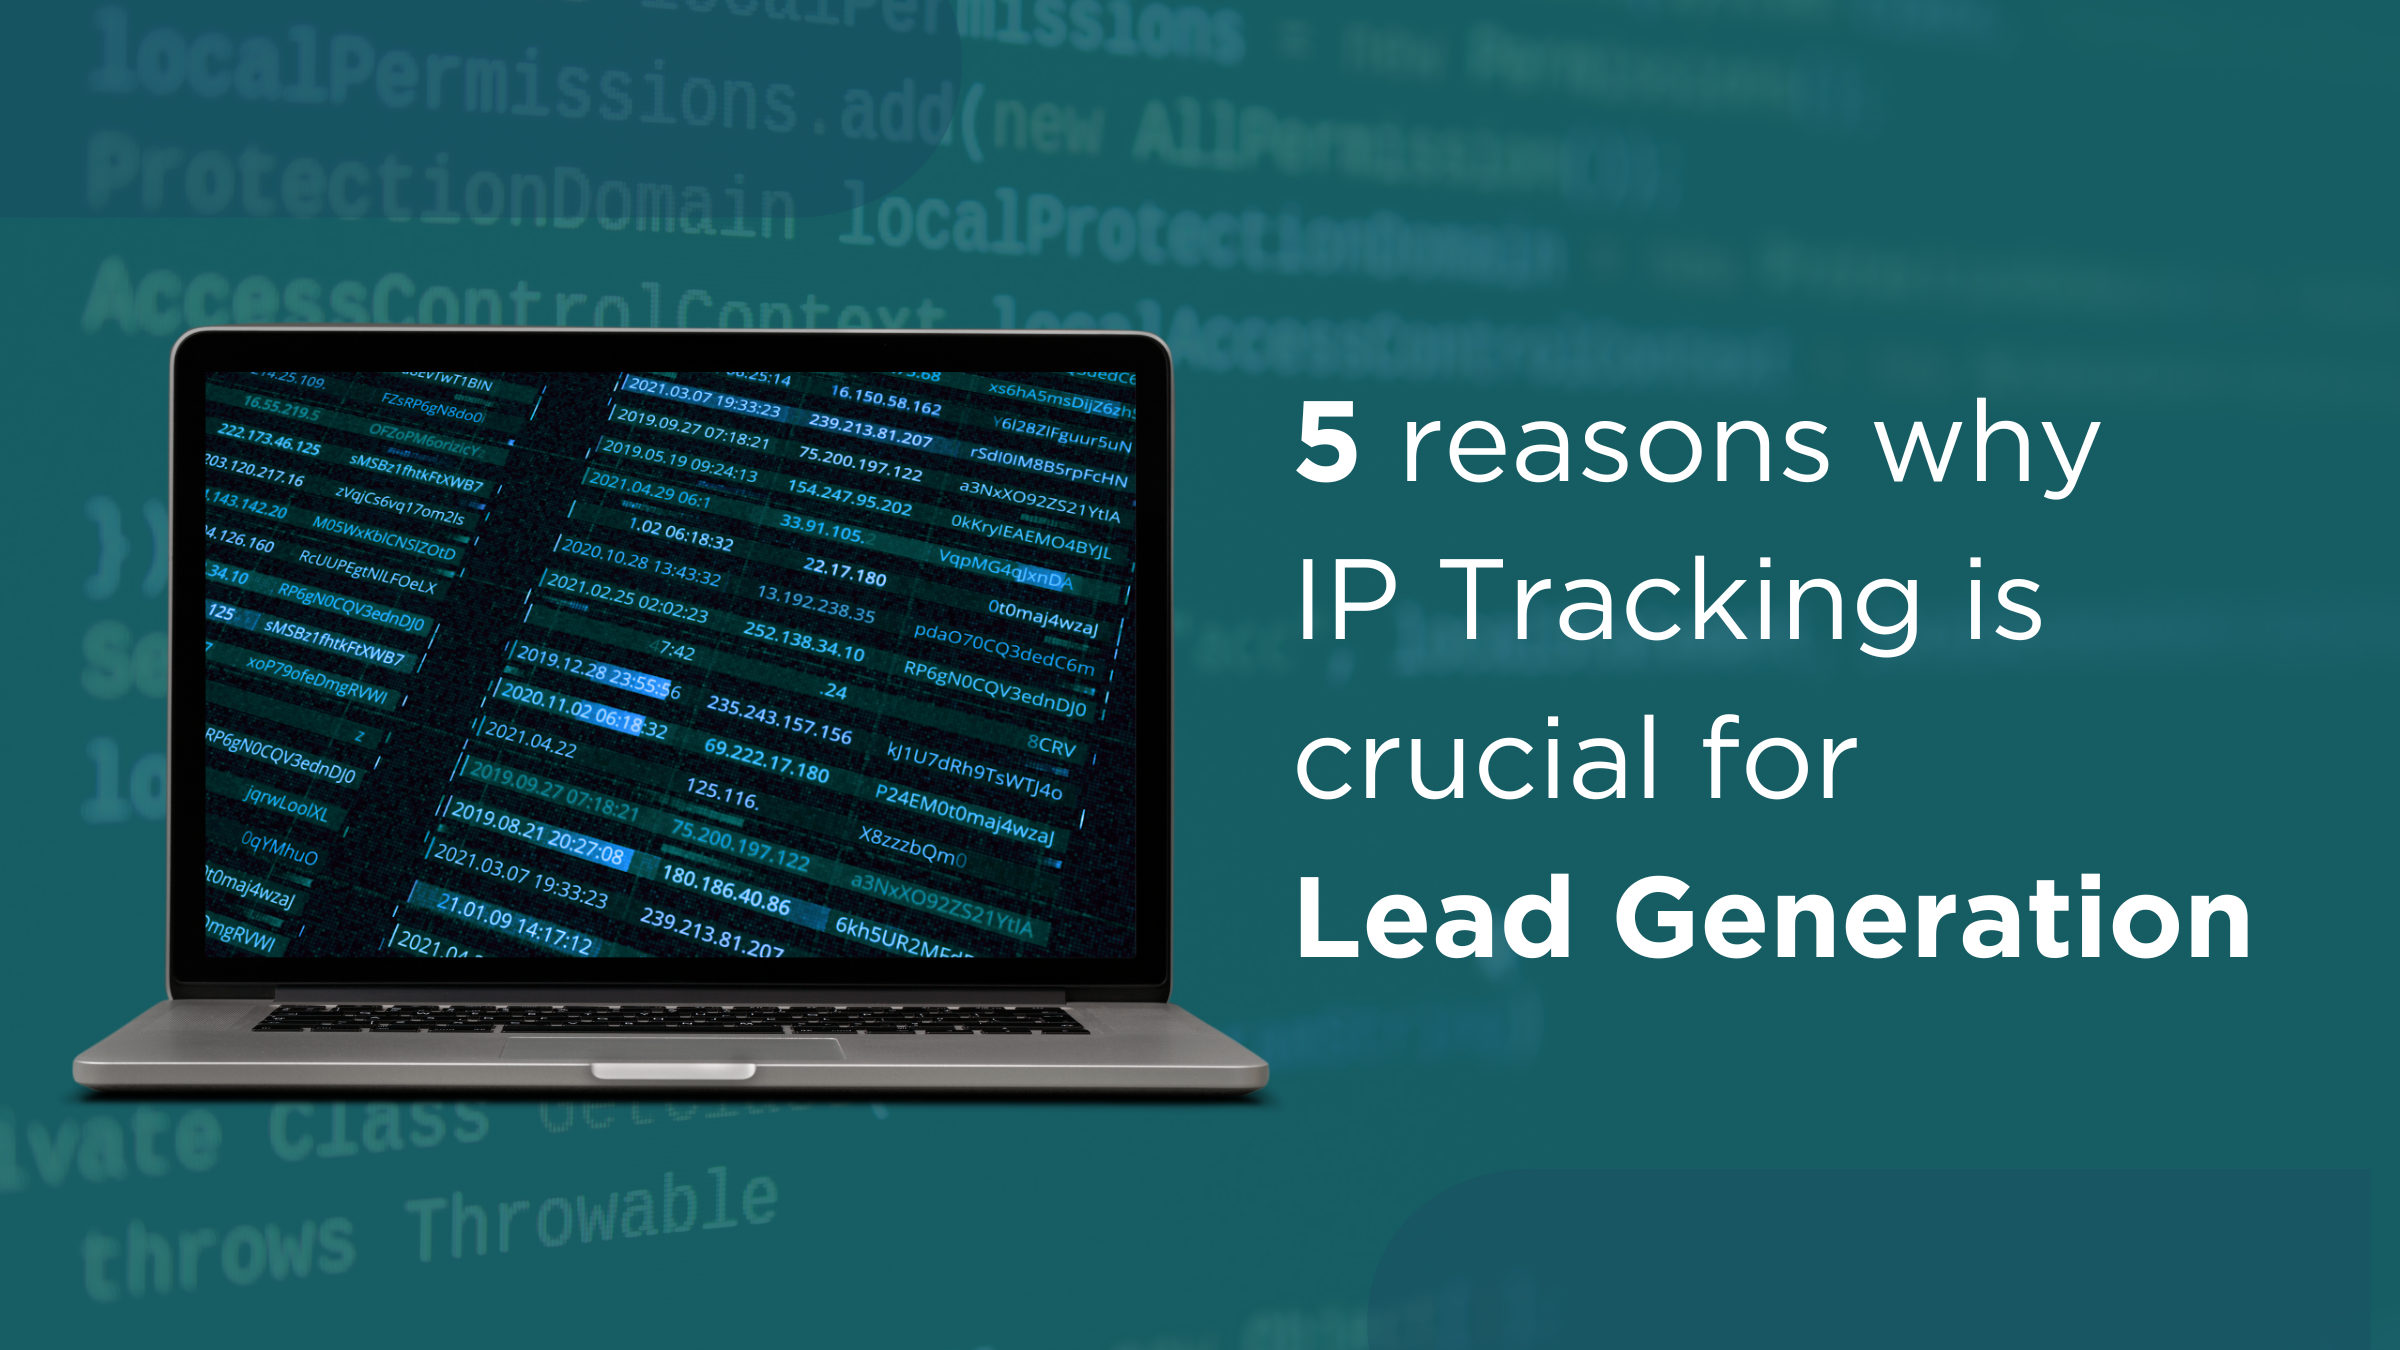 5 reasons why IP Tracking is crucial for Lead Generation